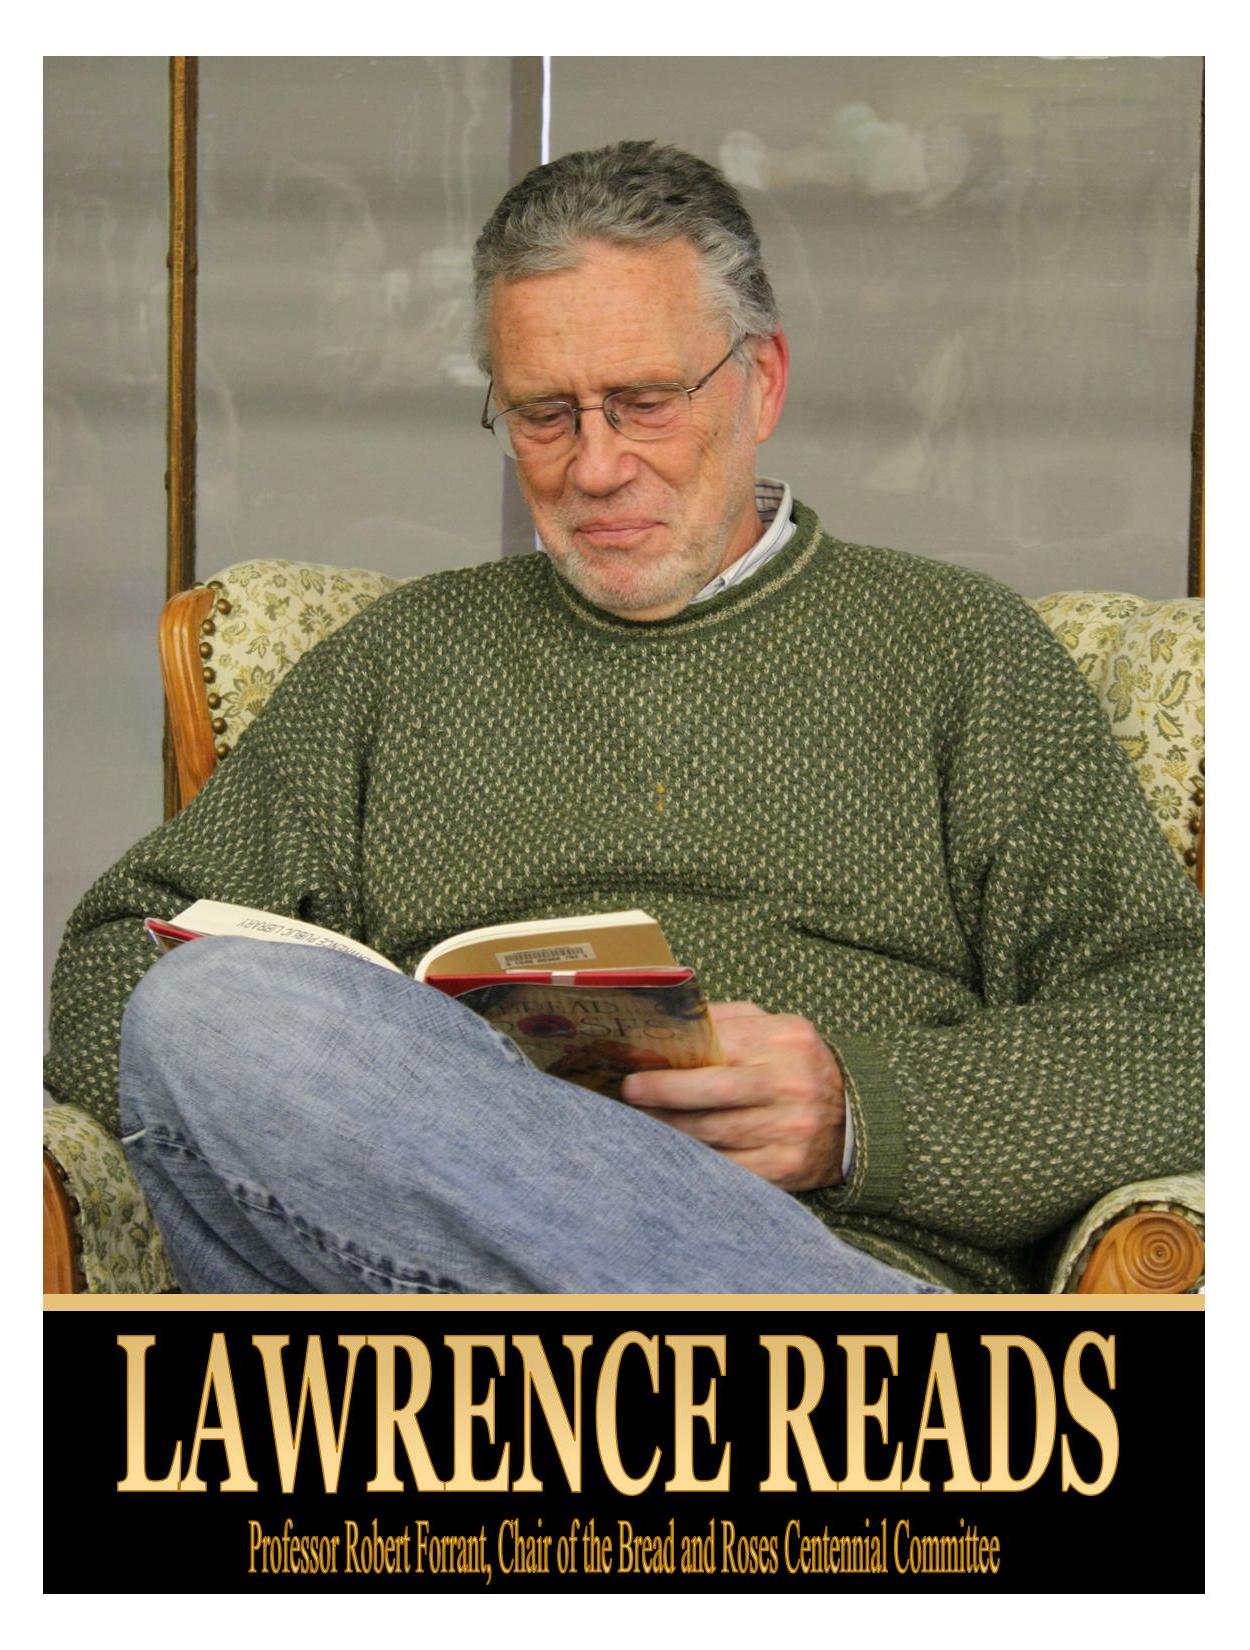 LawrenceReads